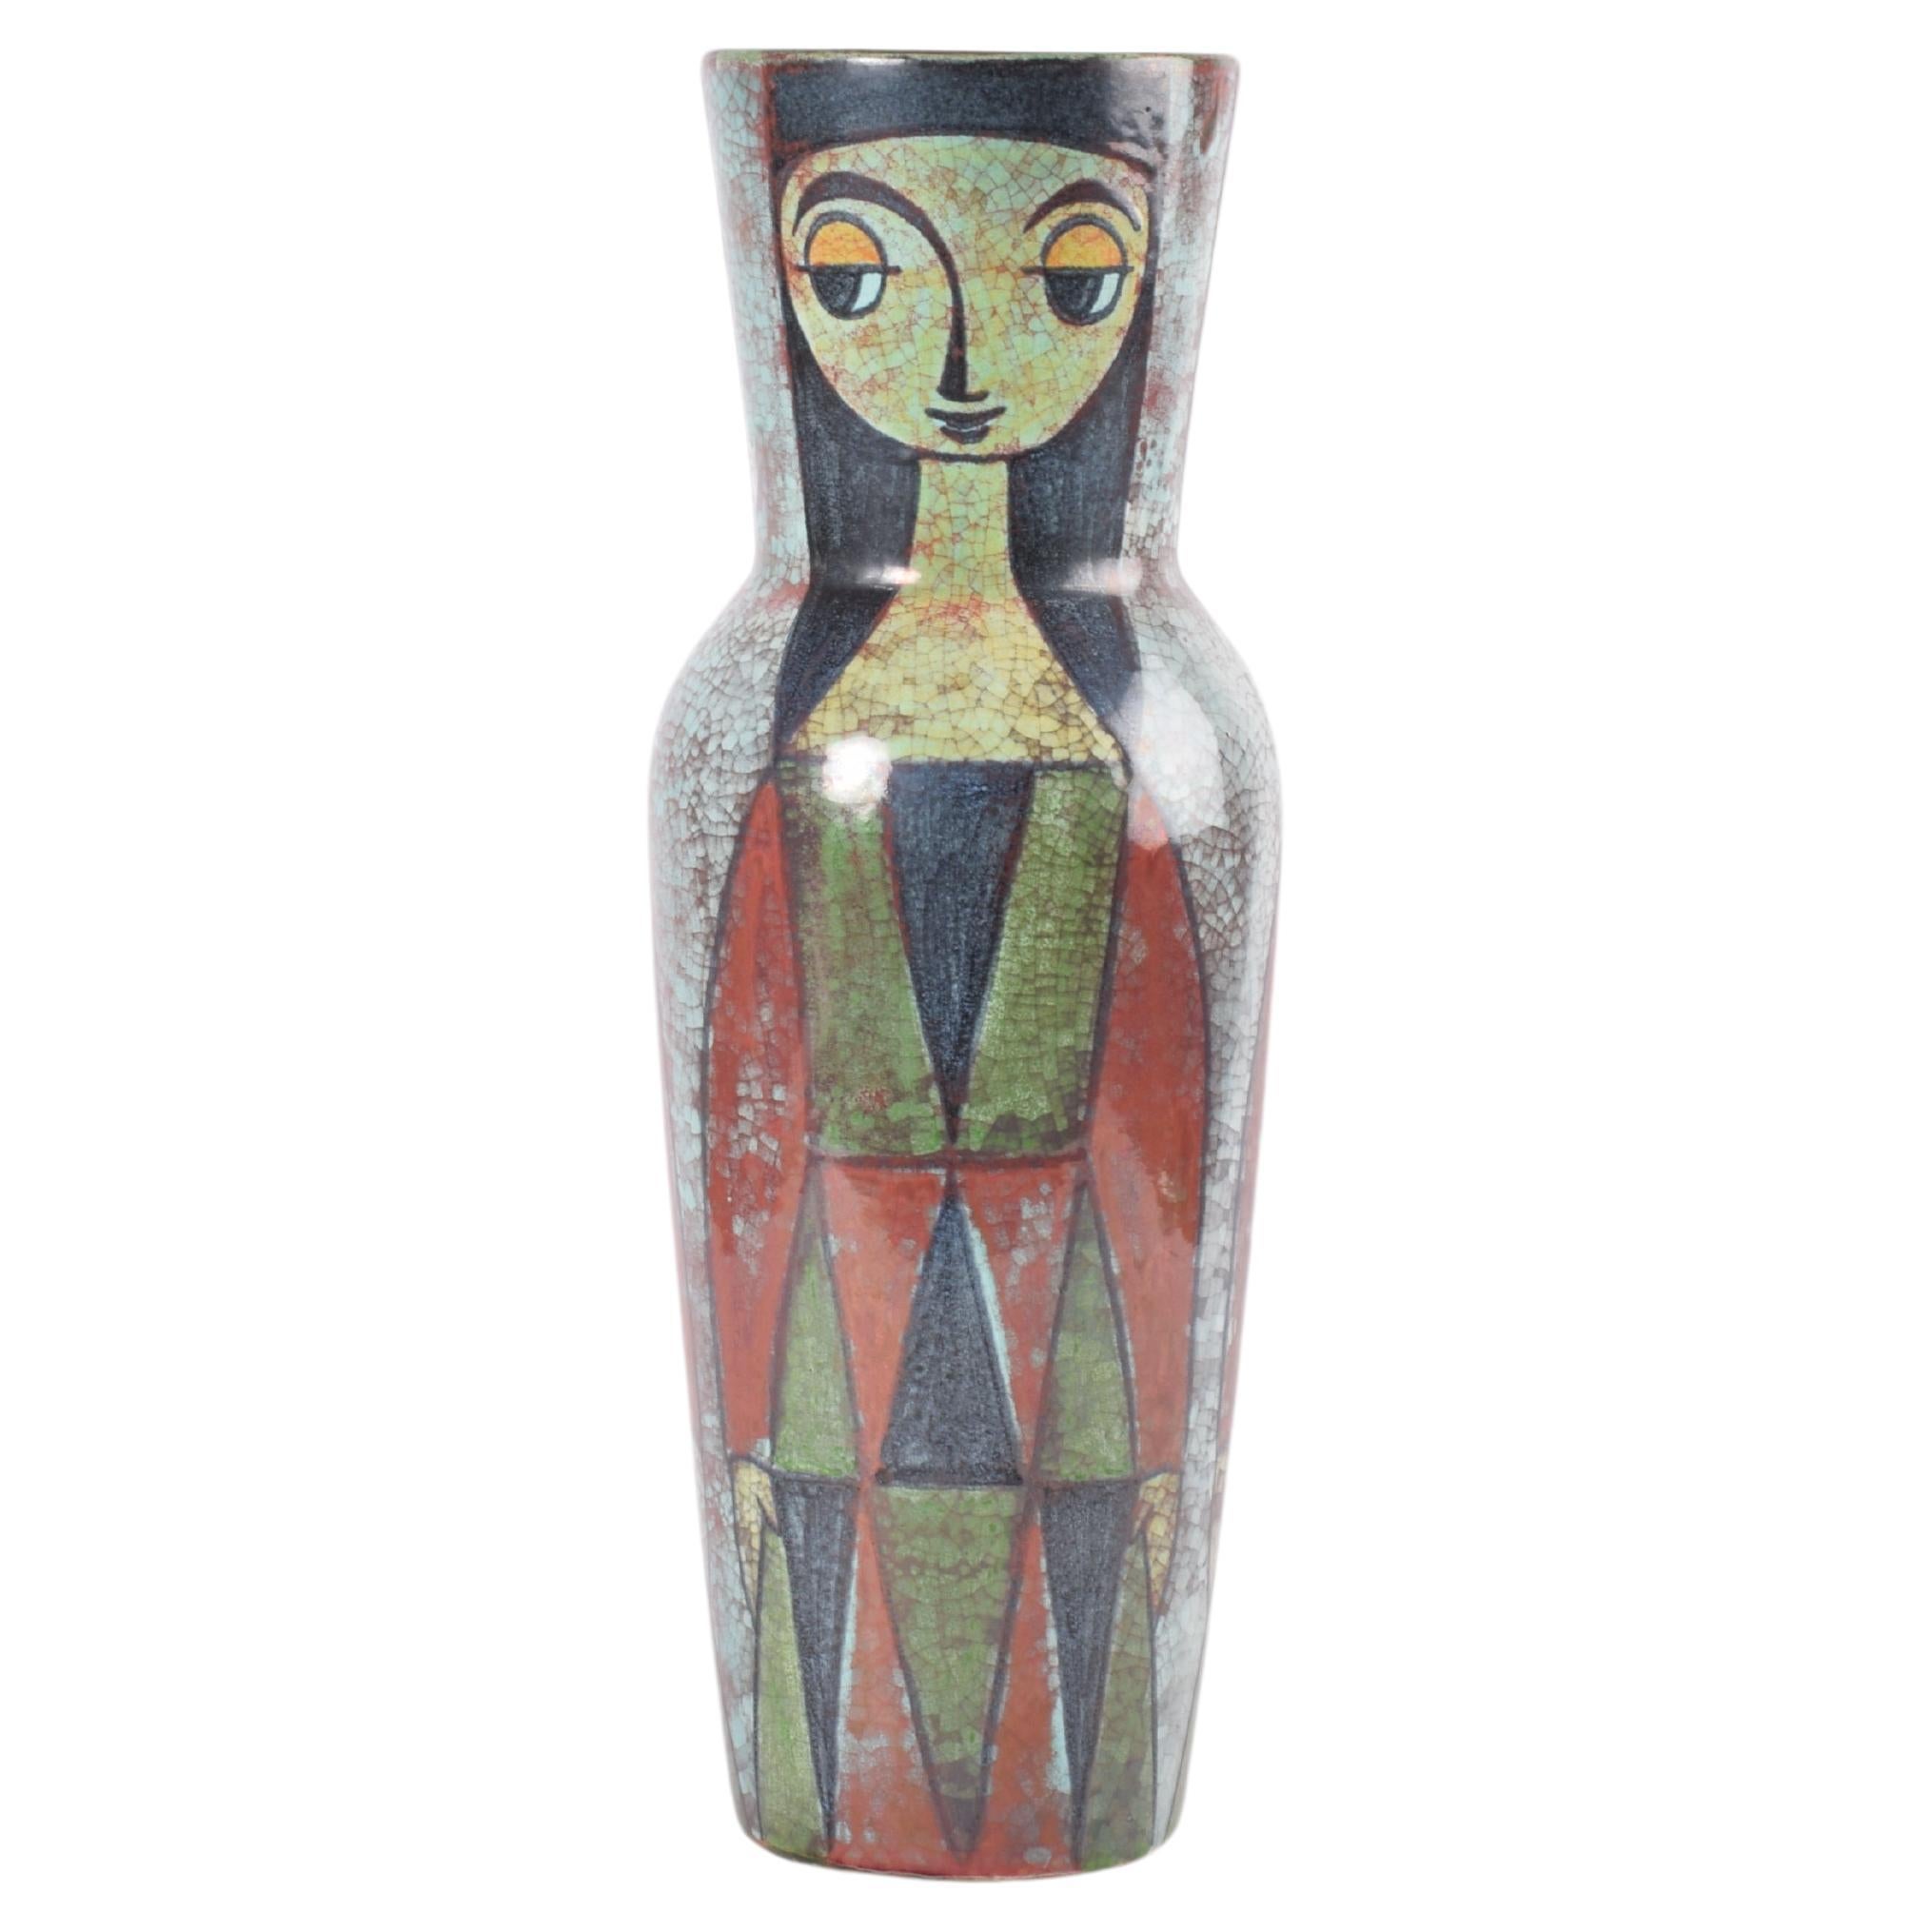 Tall Vase by Marianne Starck for MA&S Persia Glaze Colorful Decor, Danish 1960s